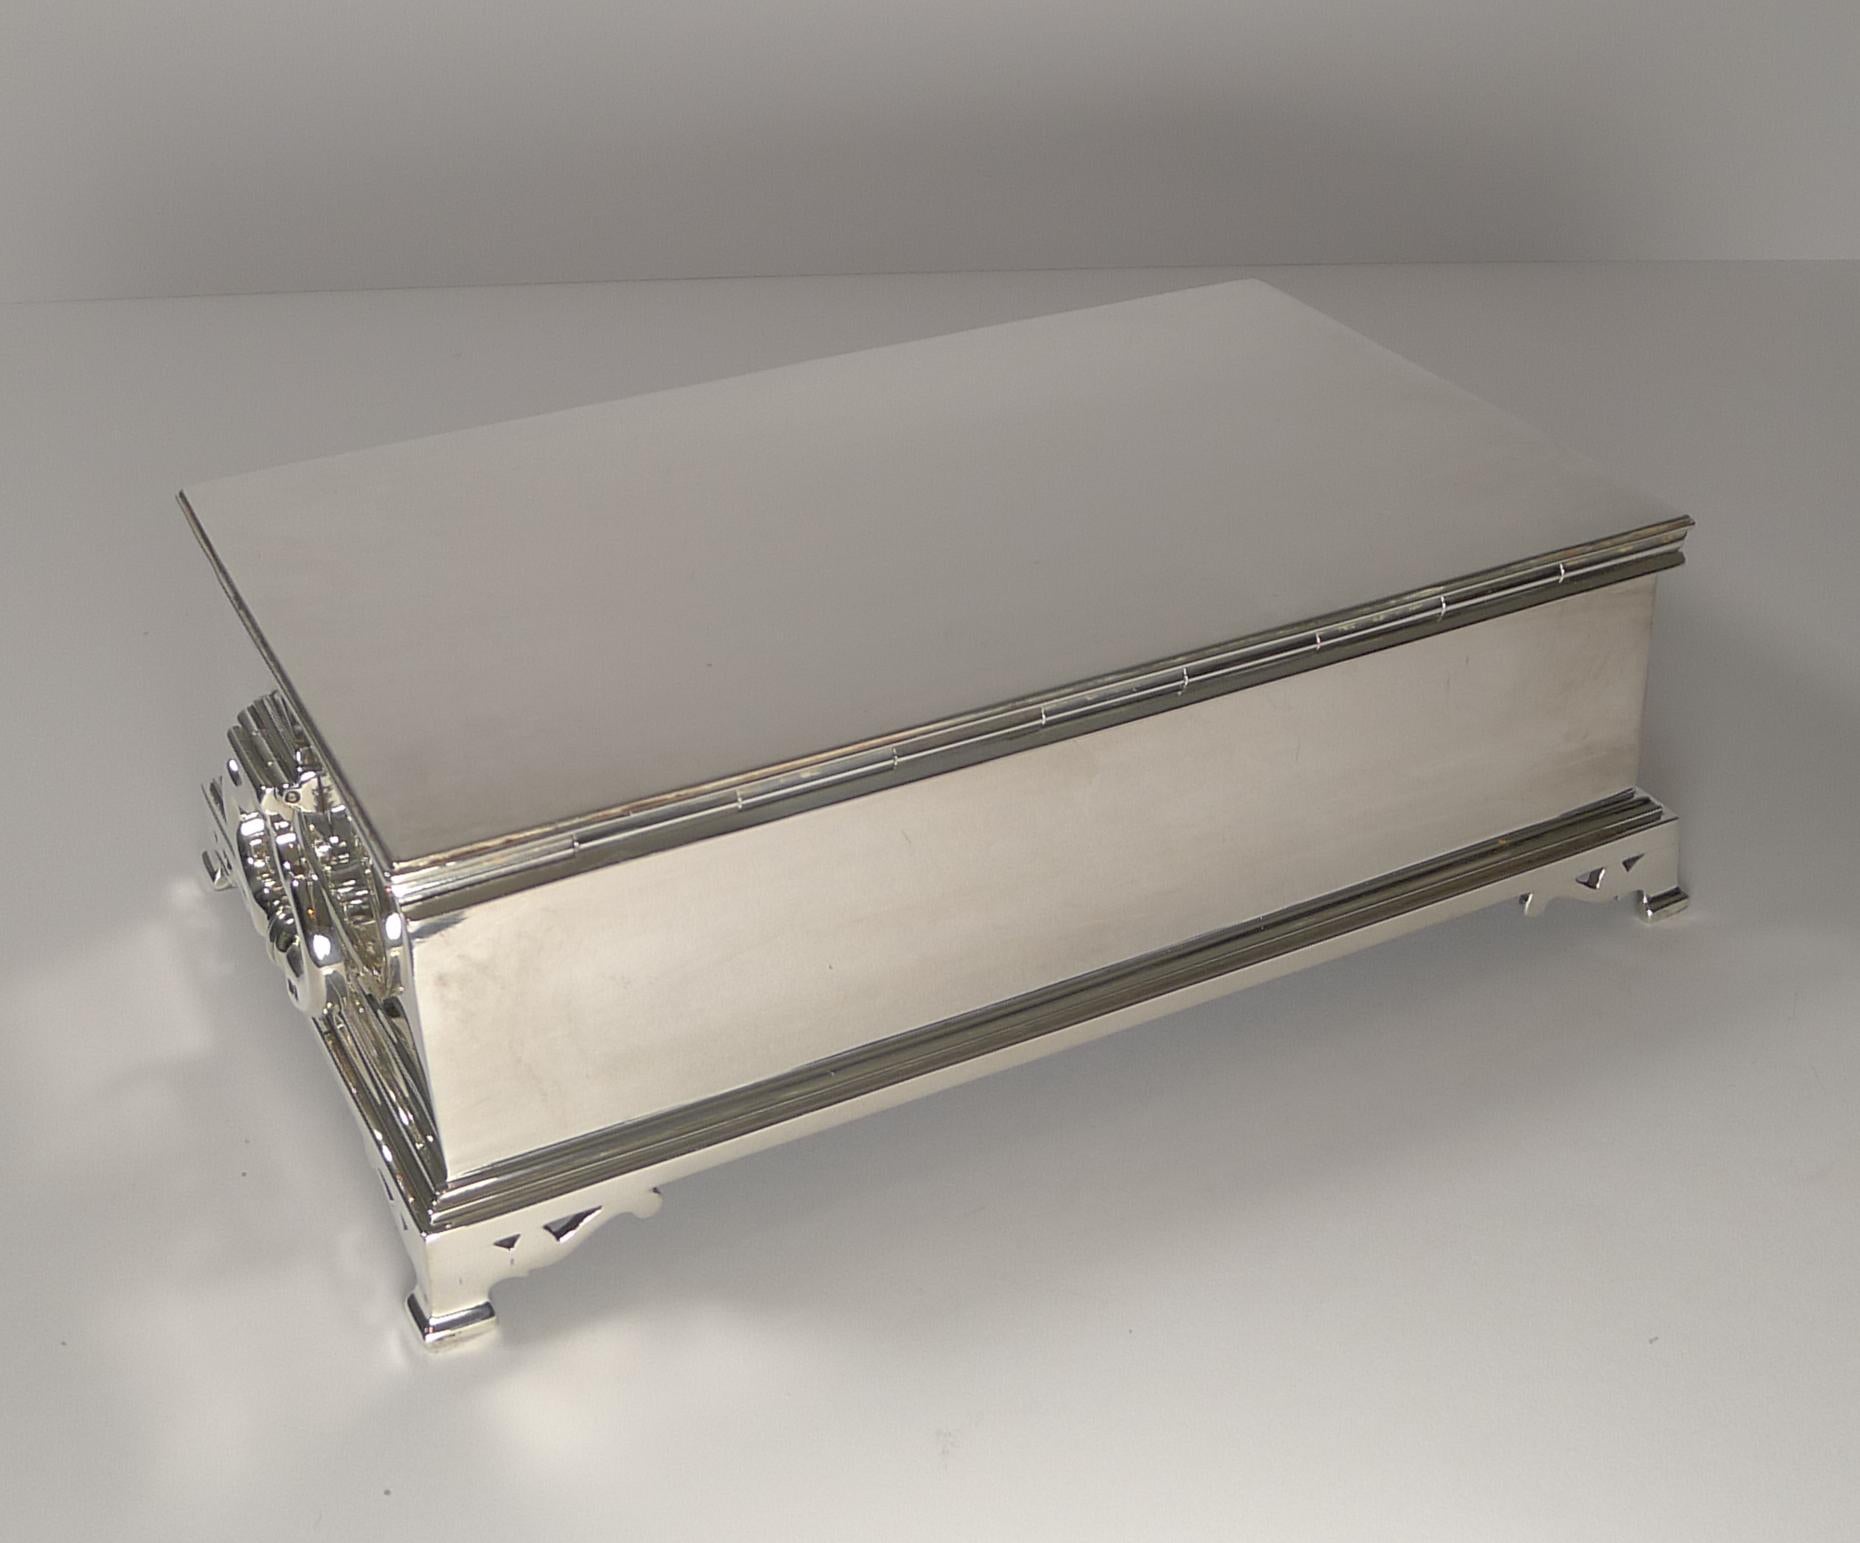 A top quality cigar box made from English solid or sterling silver, a heavy box with good gauge silver with solid cast bracket feet and the most fabulous two hinged handles to either side, both separately hallmarked.

When the lid is lifted, you